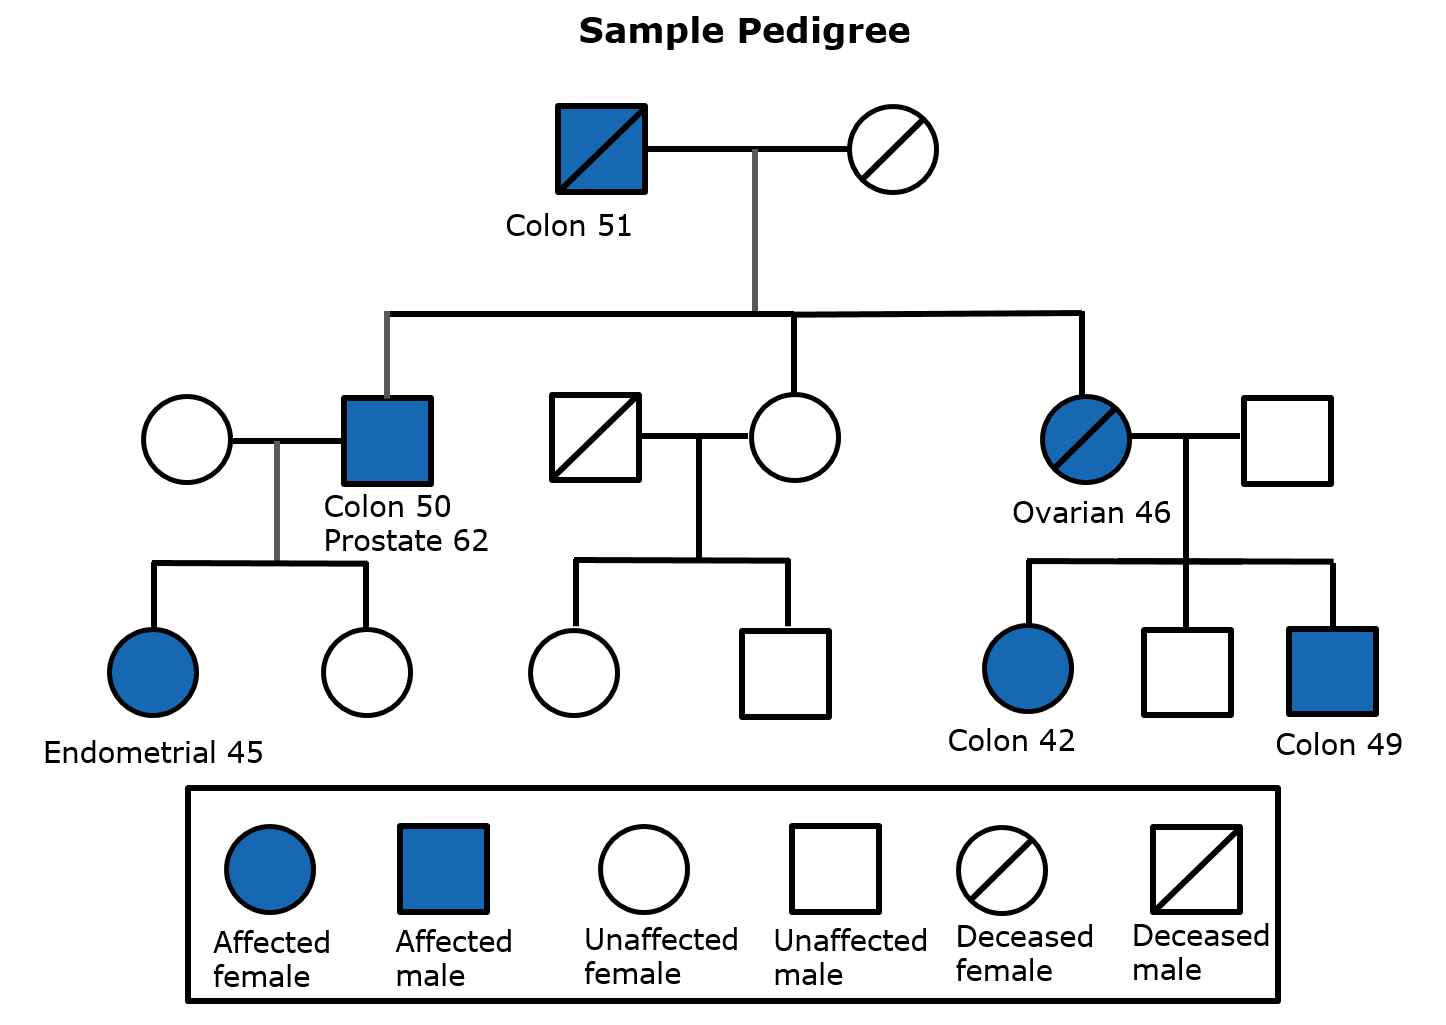 Picture of a sample pedigree